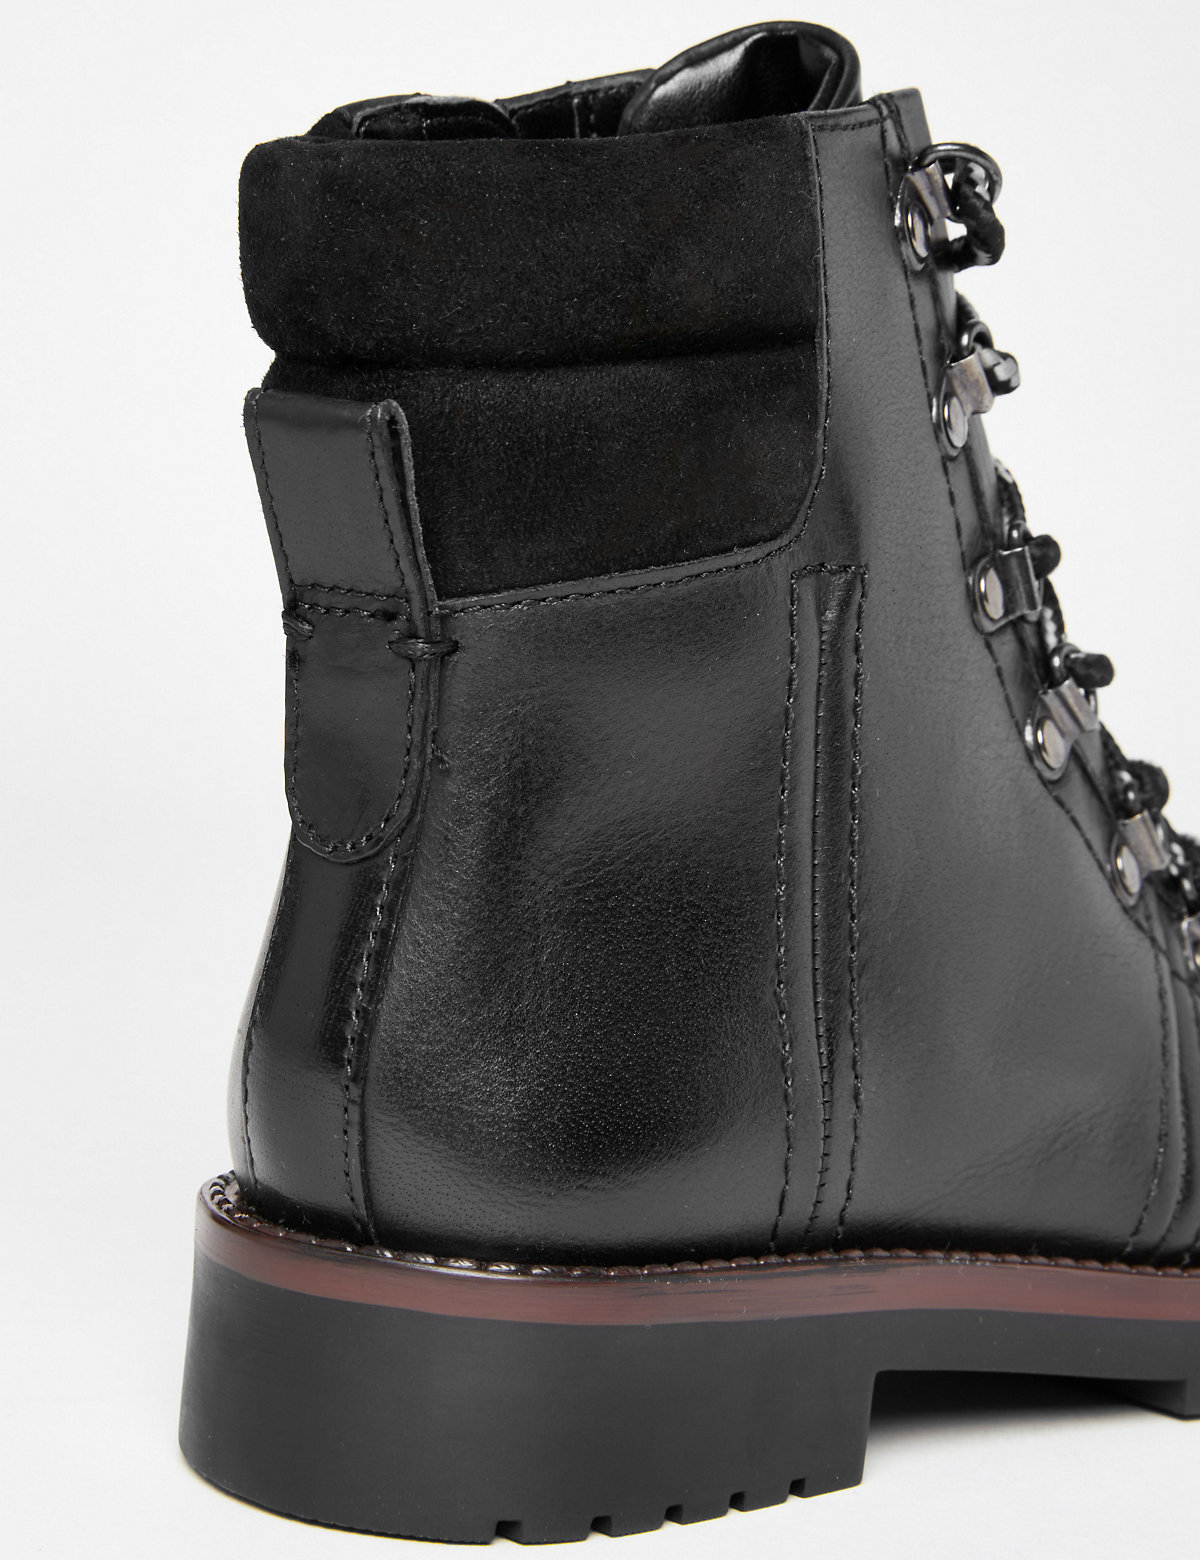 Leather Hiker Ankle Boots